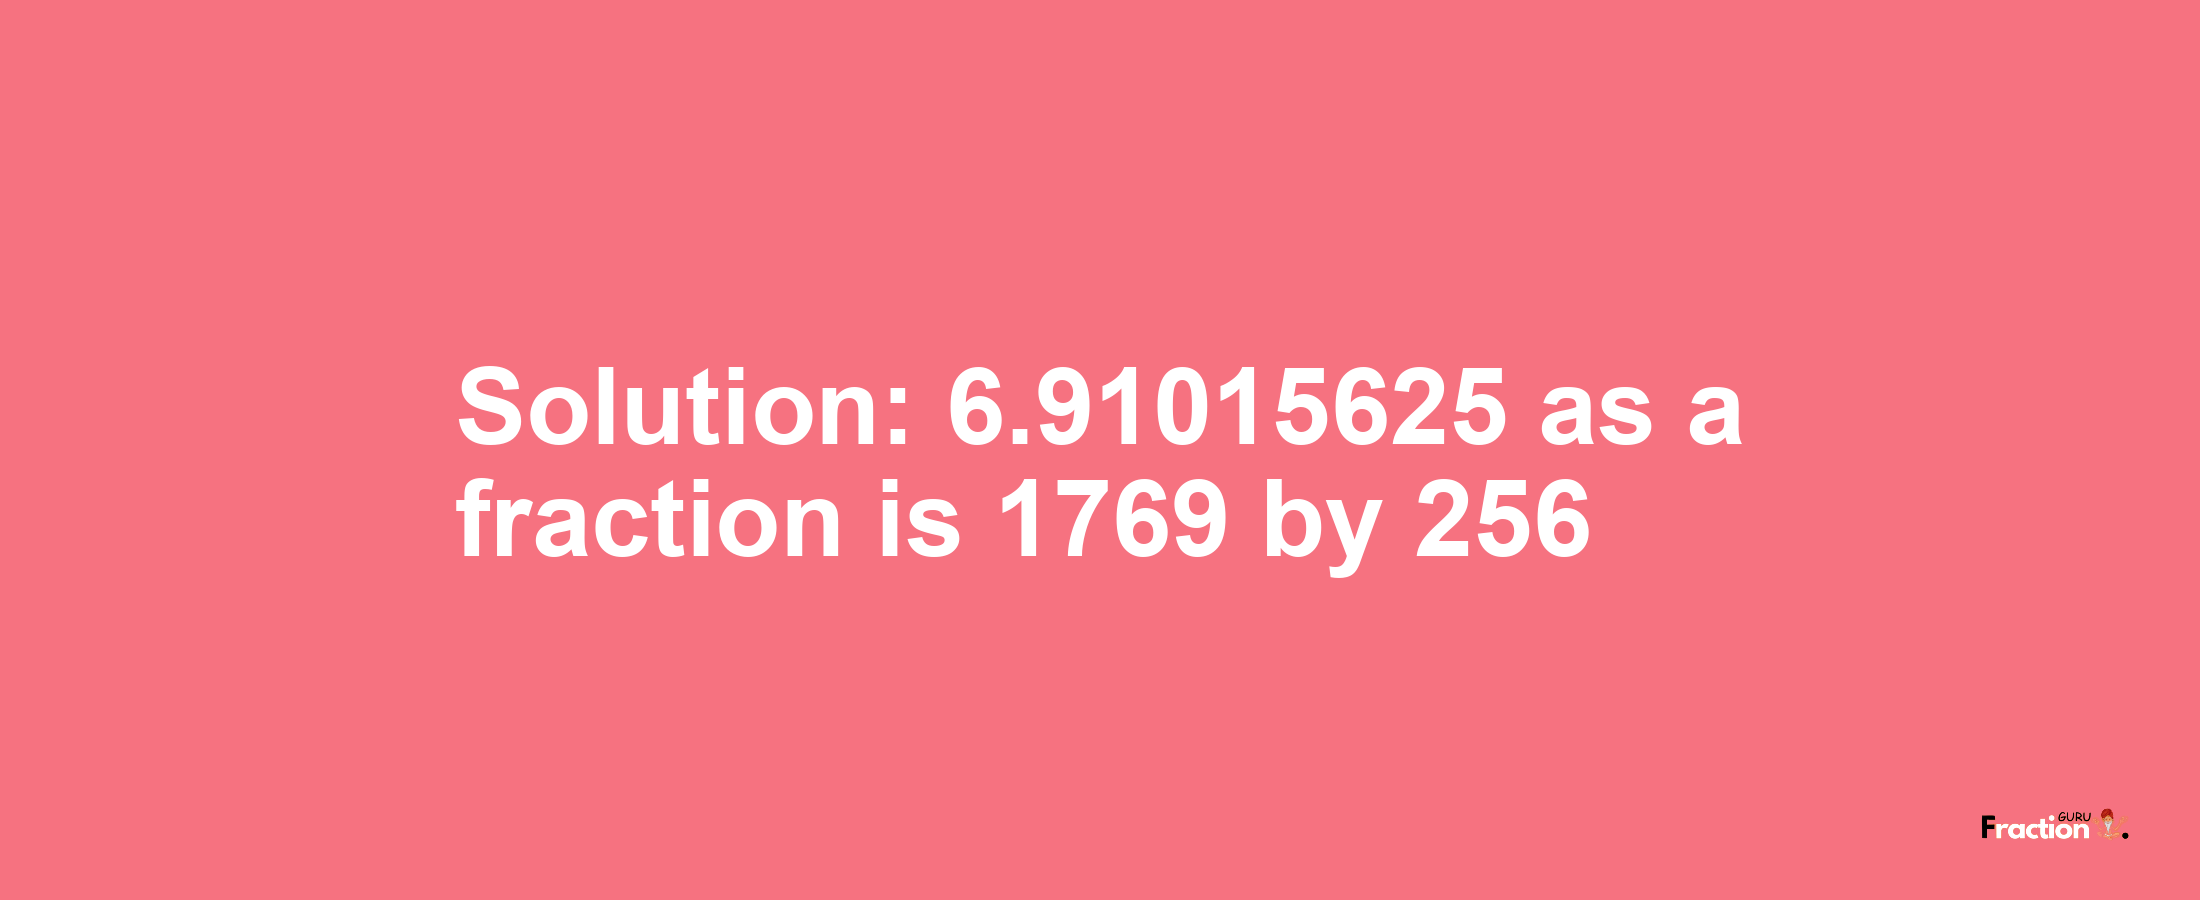 Solution:6.91015625 as a fraction is 1769/256